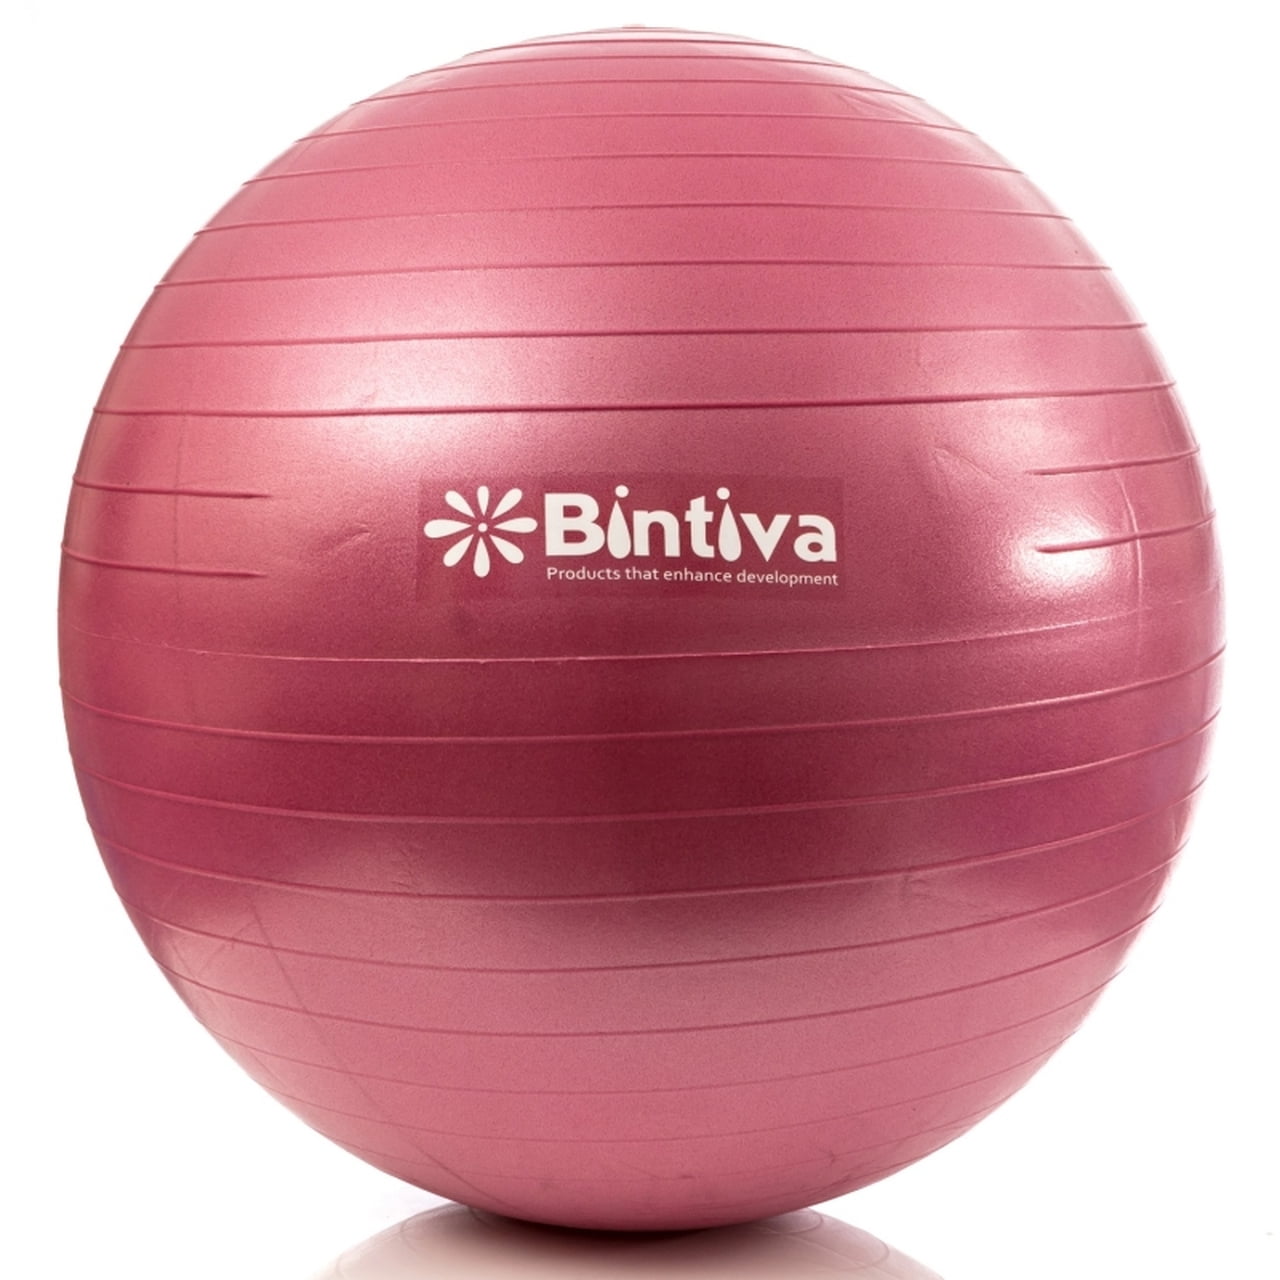 Exercise Gym Ball 100Cm PVC Anti Burst for Stability Yoga Ball Fitness Yoga  Childbirth Assisted Ball Suitable for Home Gym Office Slimming (Pink)